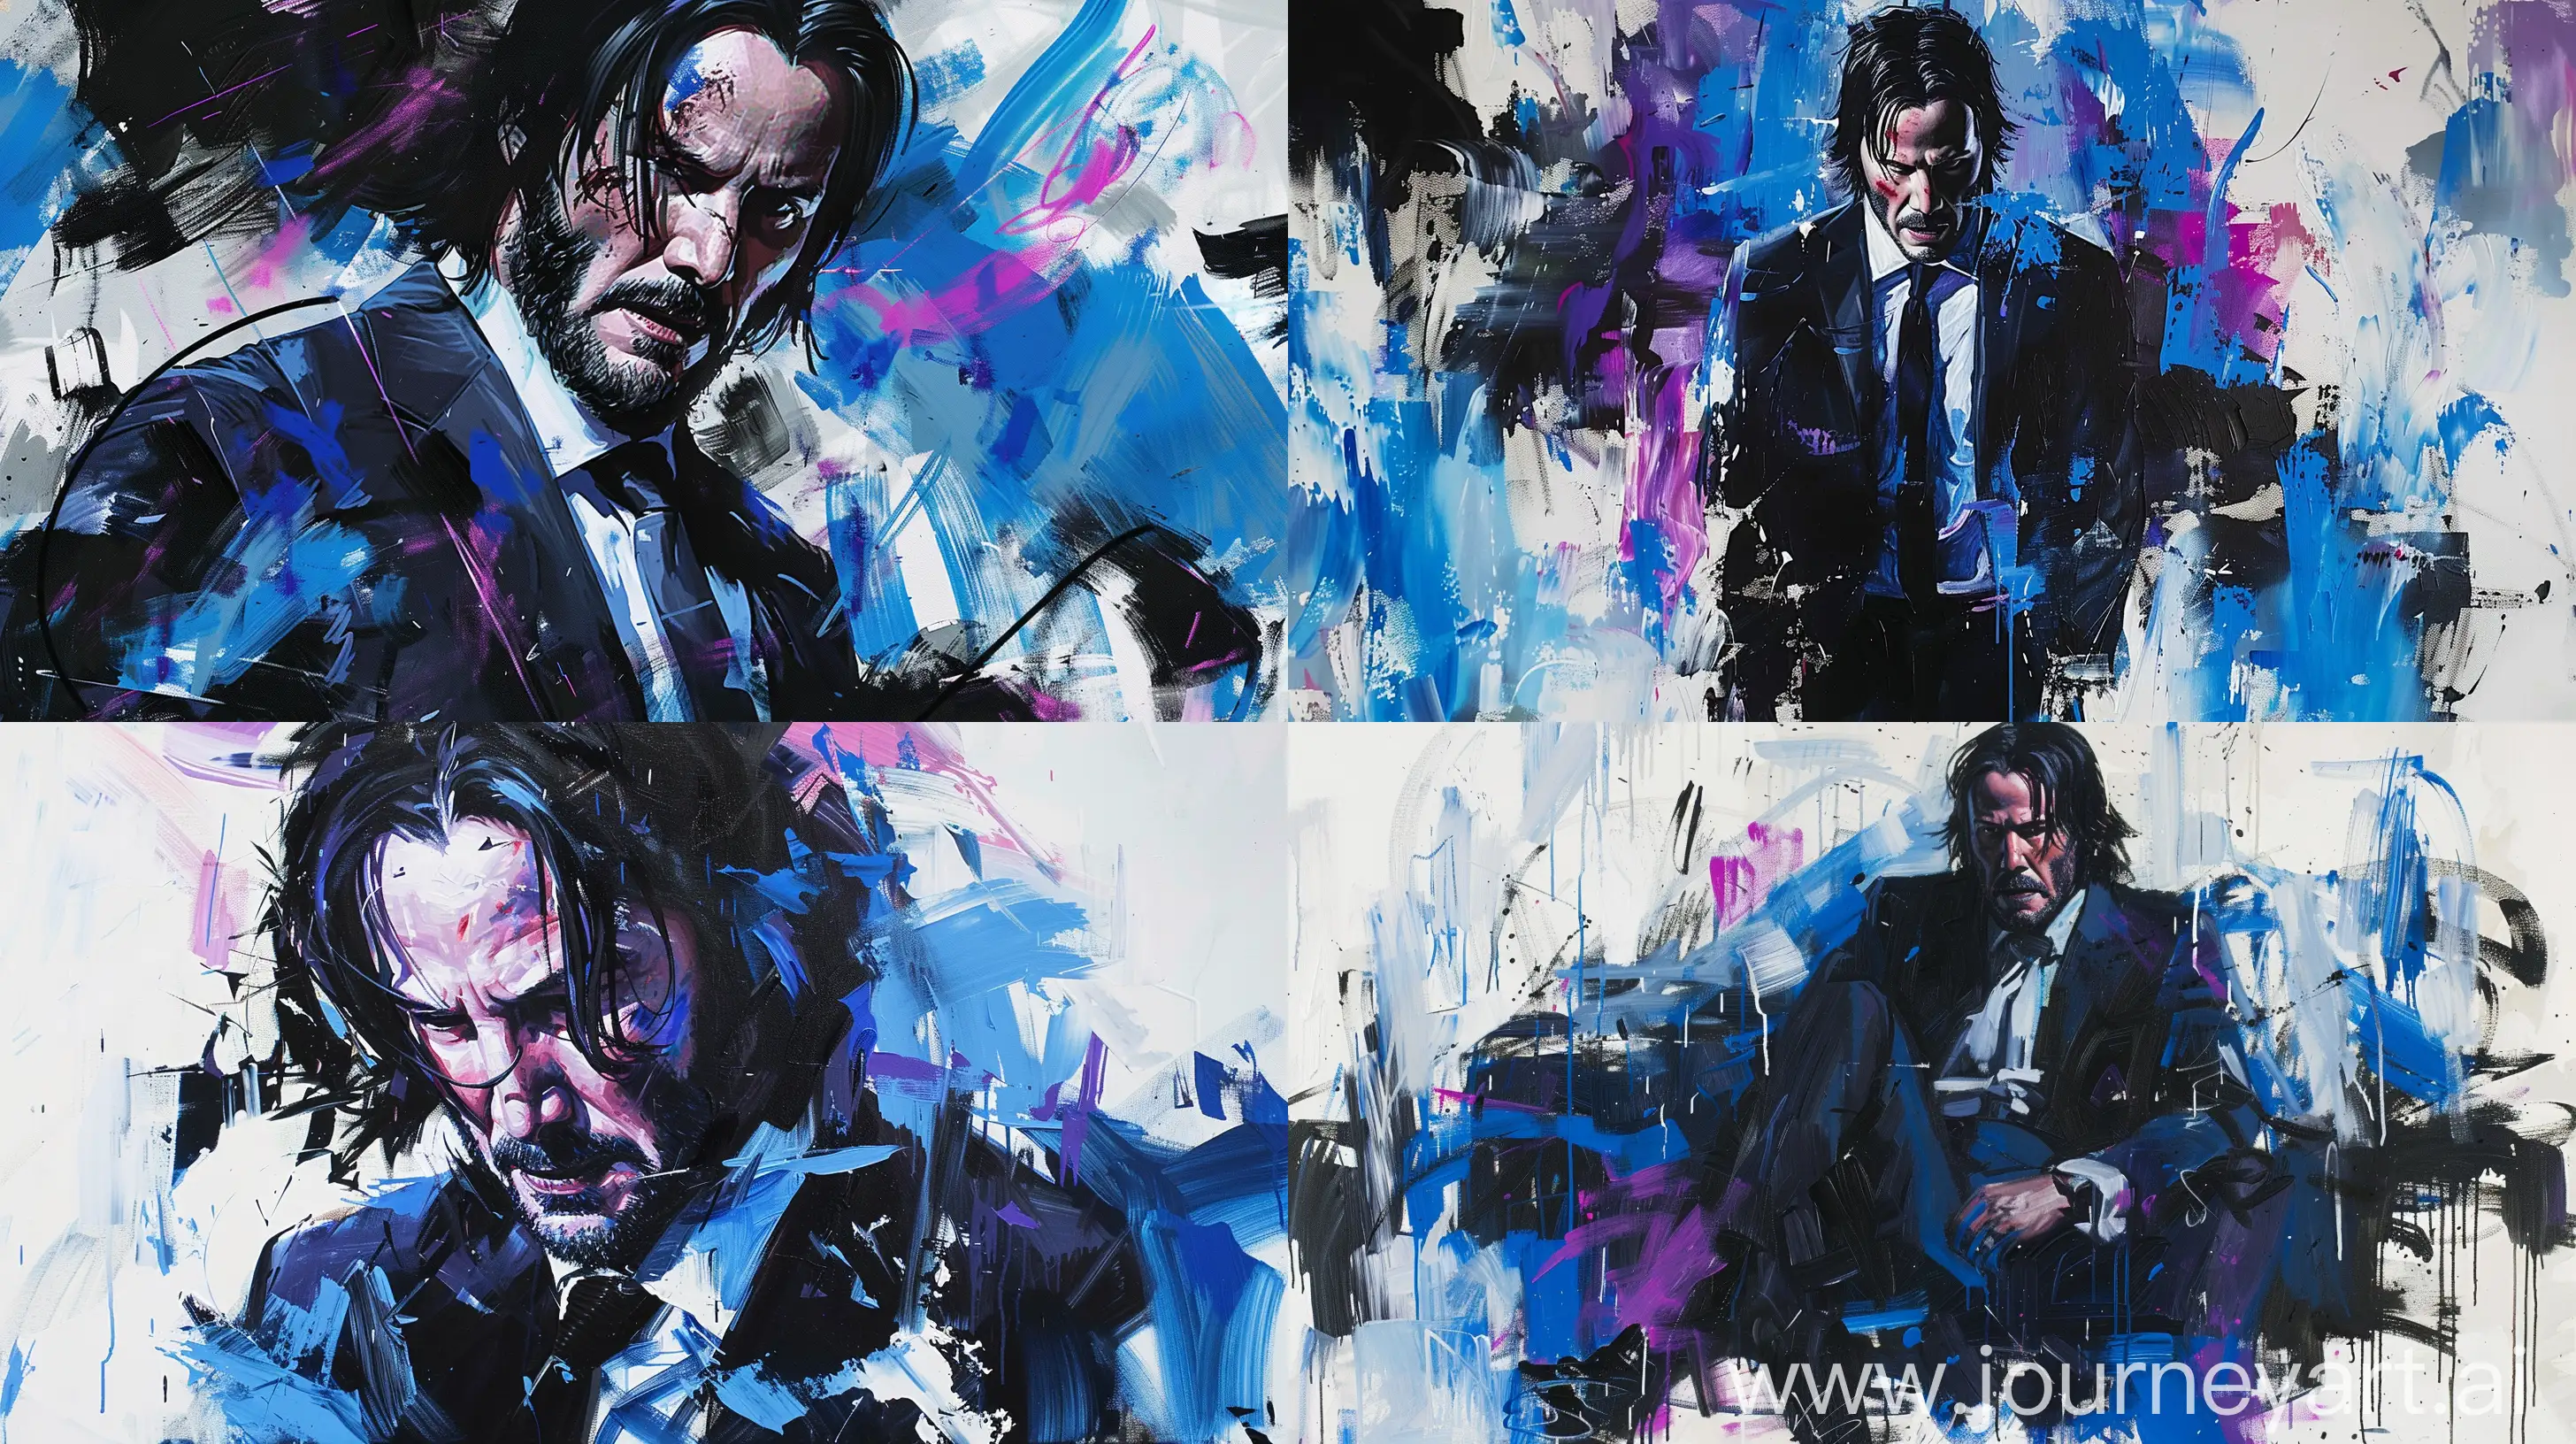 oil painting of John Wick with a color palette dominated by shades of blue, black, purple, white, and hints of pink. The bold and expressive brush strokes create a dynamic and movement-filled composition.

The color palette includes various hues of blue, ranging from dark to light, with dark blue forming the base layer and lighter blues and whites adding depth and contrast. Black outlines and shapes define the forms in the painting, adding a graphic element to the overall structure.

A touch of pink stands out against the cool blues, adding a warm accent to the composition. The painting's style is loose and gestural, with visible brushwork that varies in thickness and intensity, indicating the artist's expressive application of paint --ar 16:9 --c 5